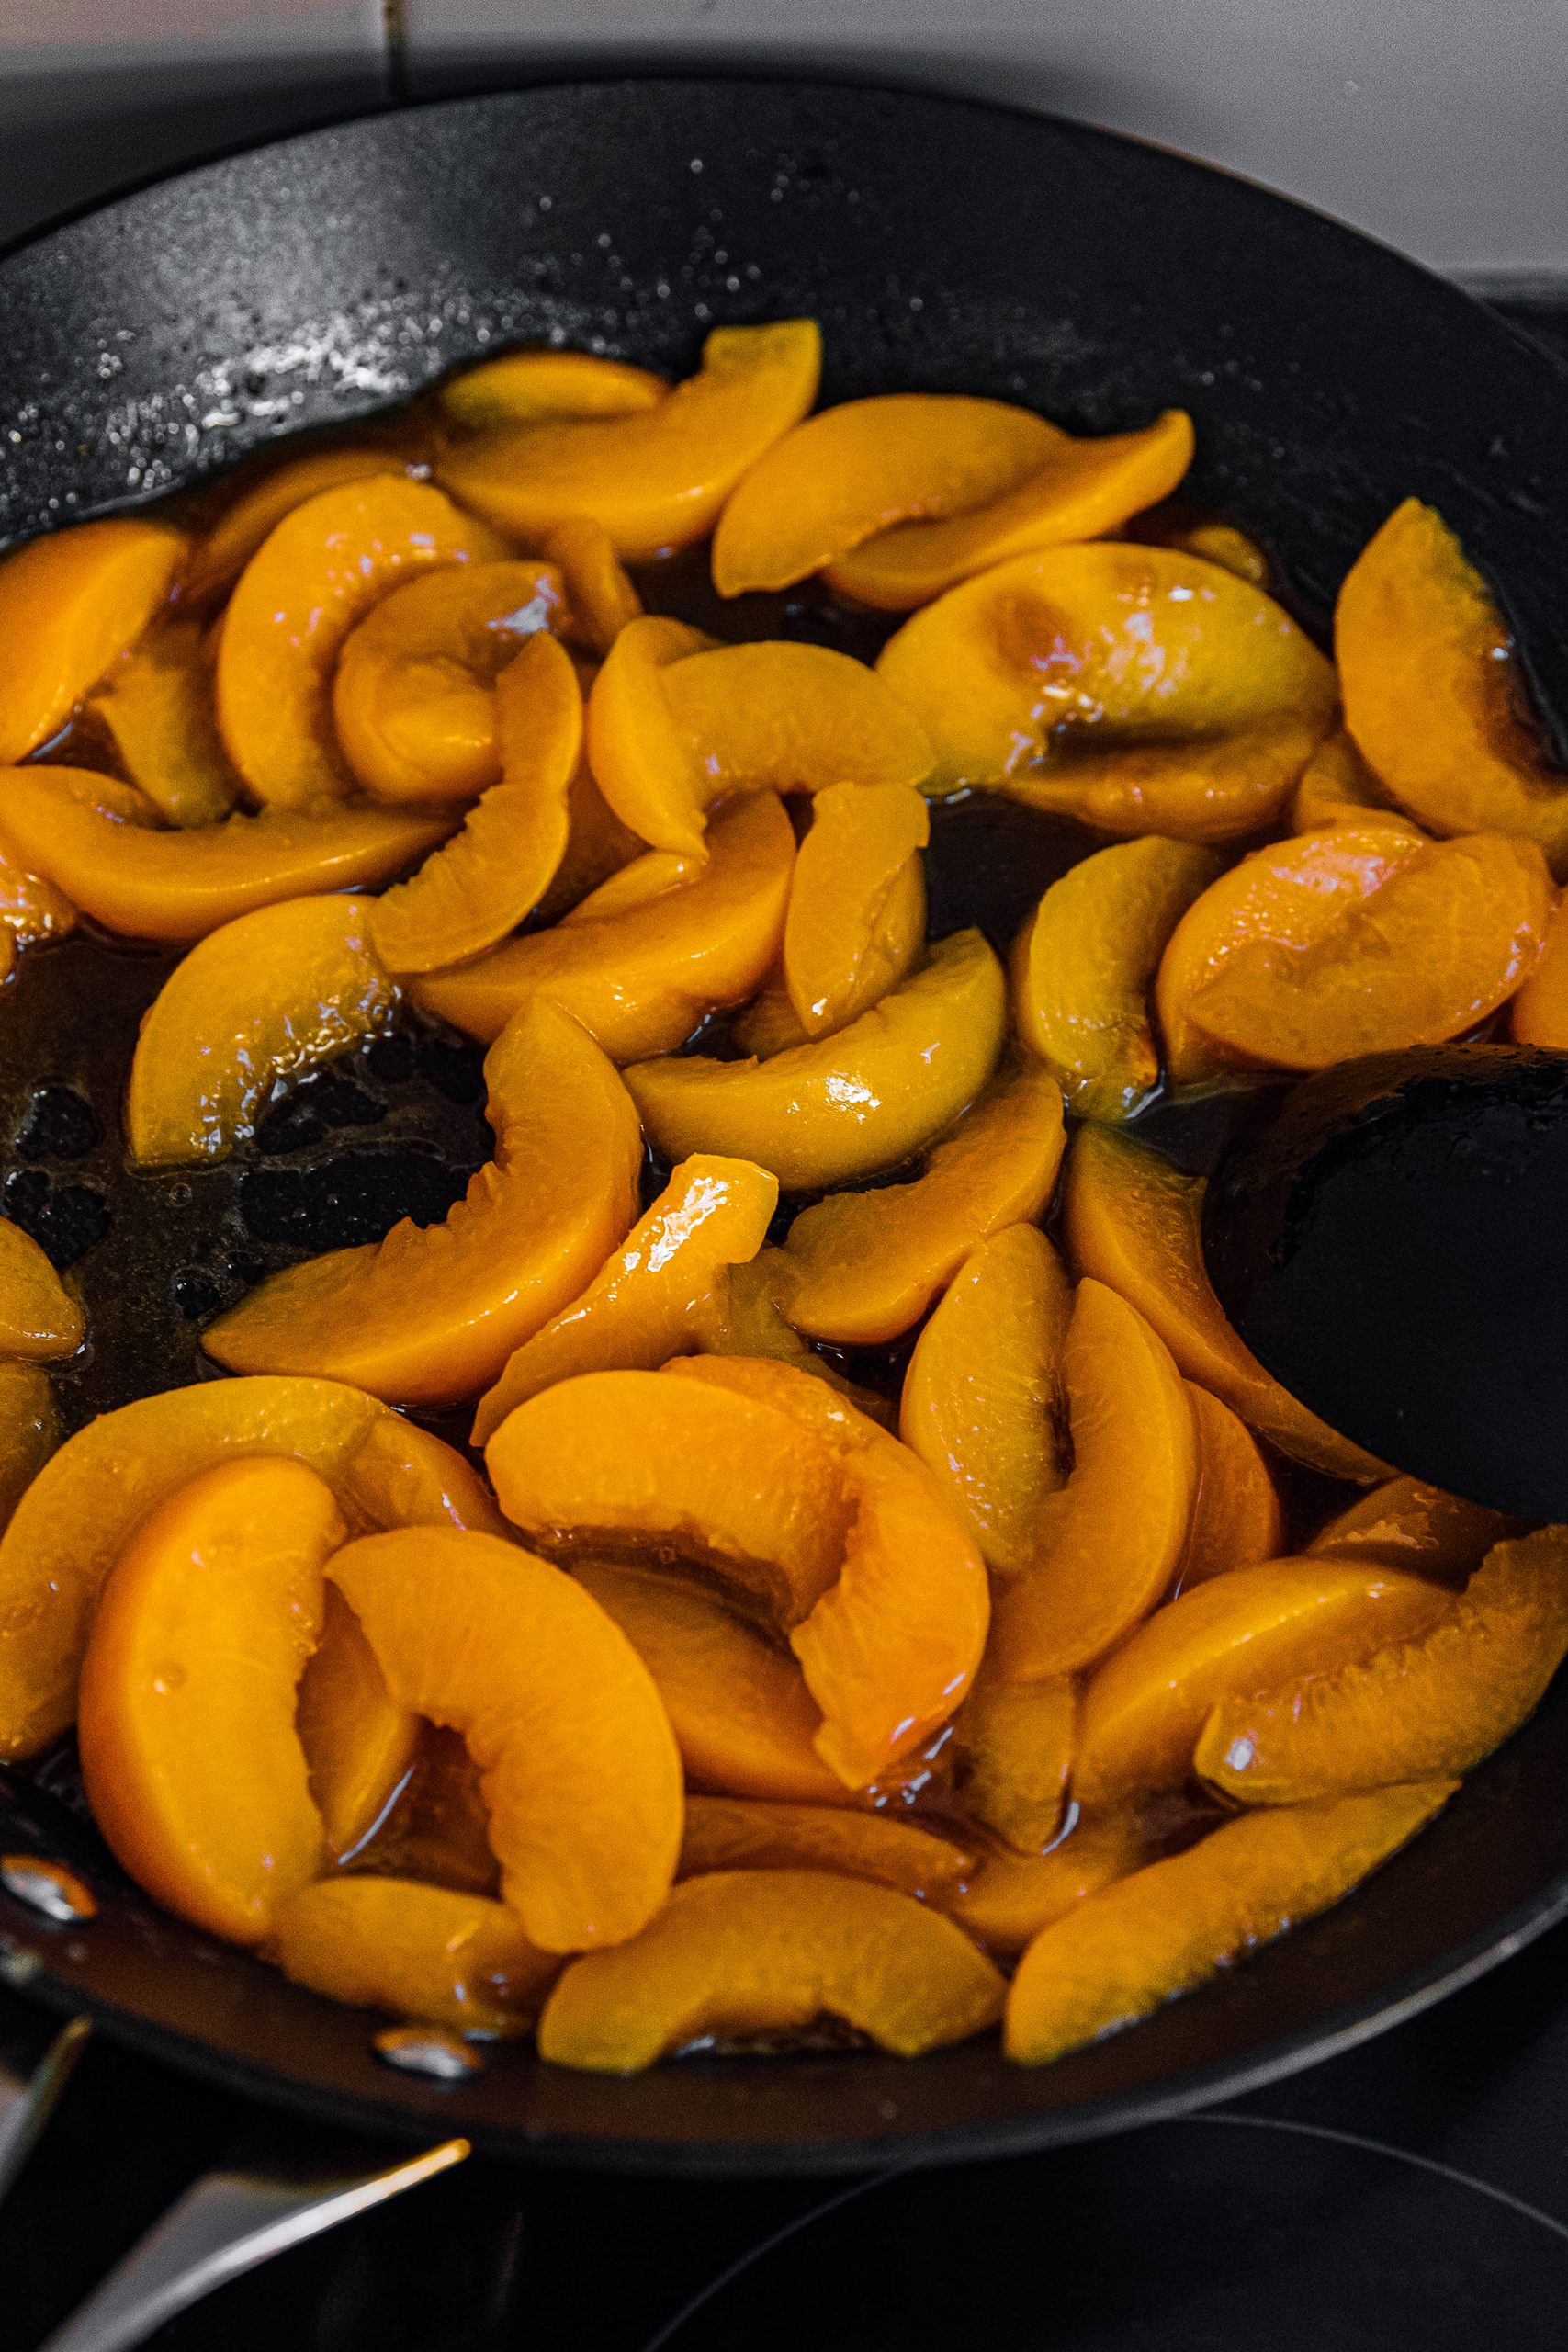 Add peaches to the pan and gently stir for 4 minutes,